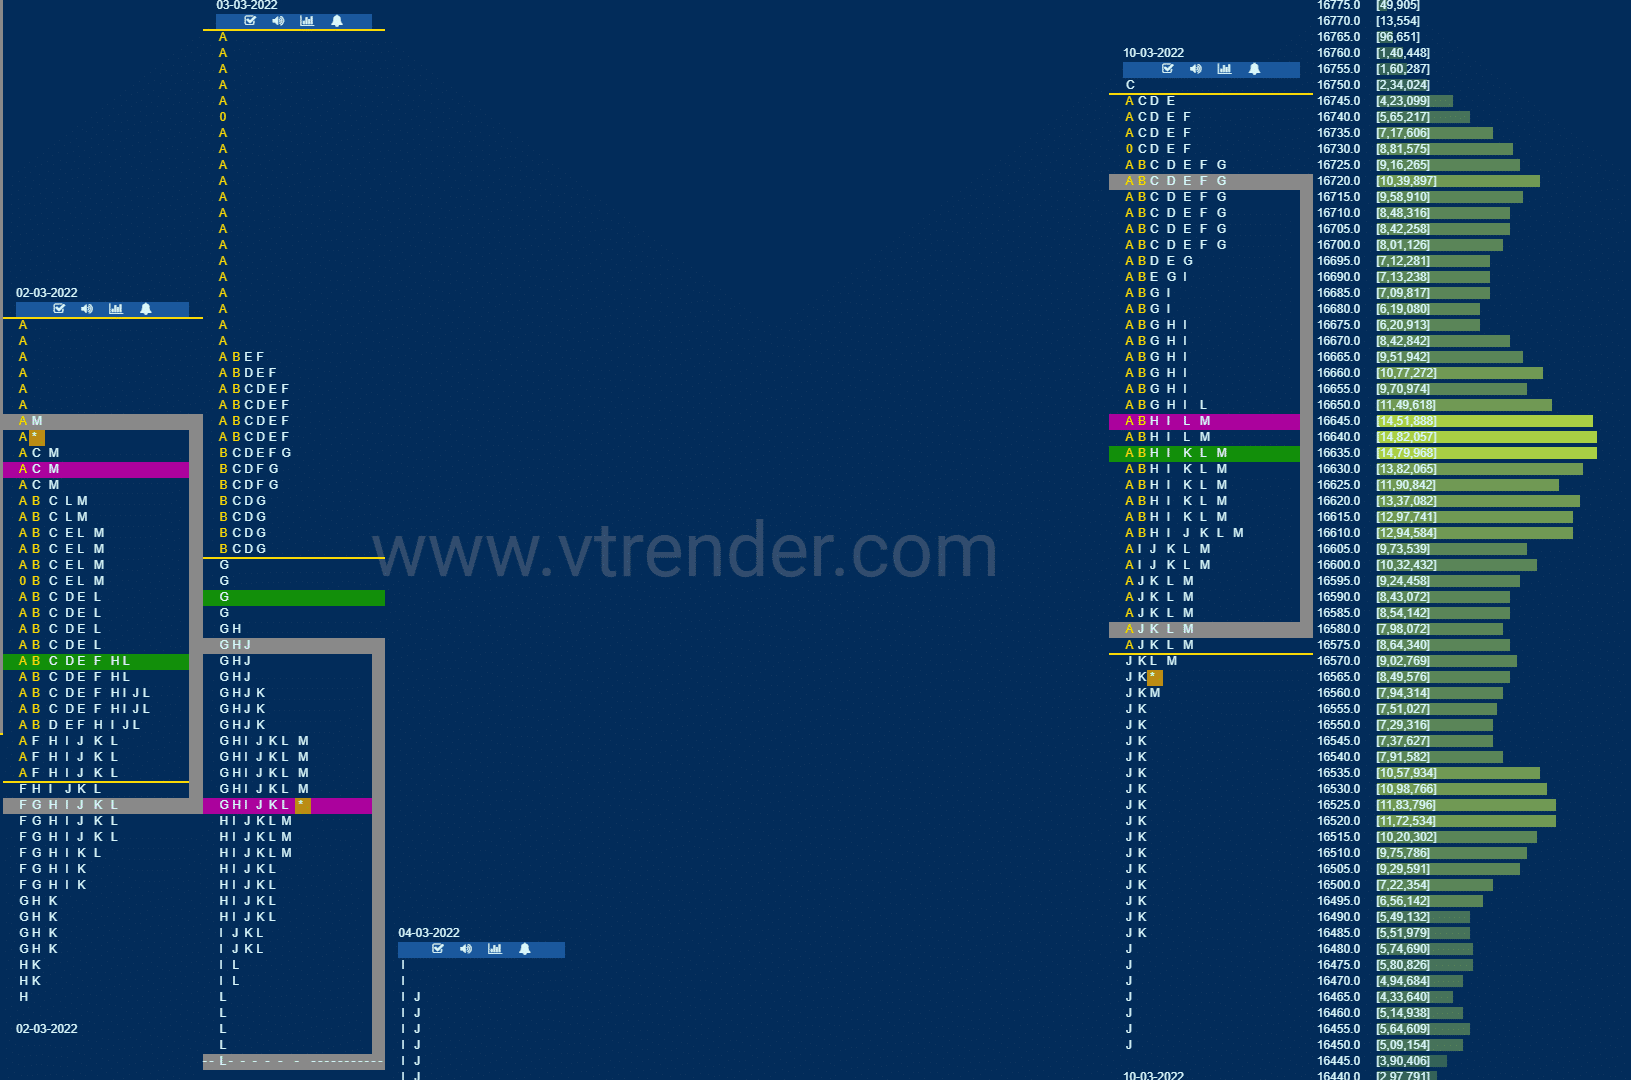 Nf 7 Market Profile Analysis Dated 10Th March 2022 Banknifty Futures, Charts, Day Trading, Intraday Trading, Intraday Trading Strategies, Market Profile, Market Profile Trading Strategies, Nifty Futures, Order Flow Analysis, Support And Resistance, Technical Analysis, Trading Strategies, Volume Profile Trading